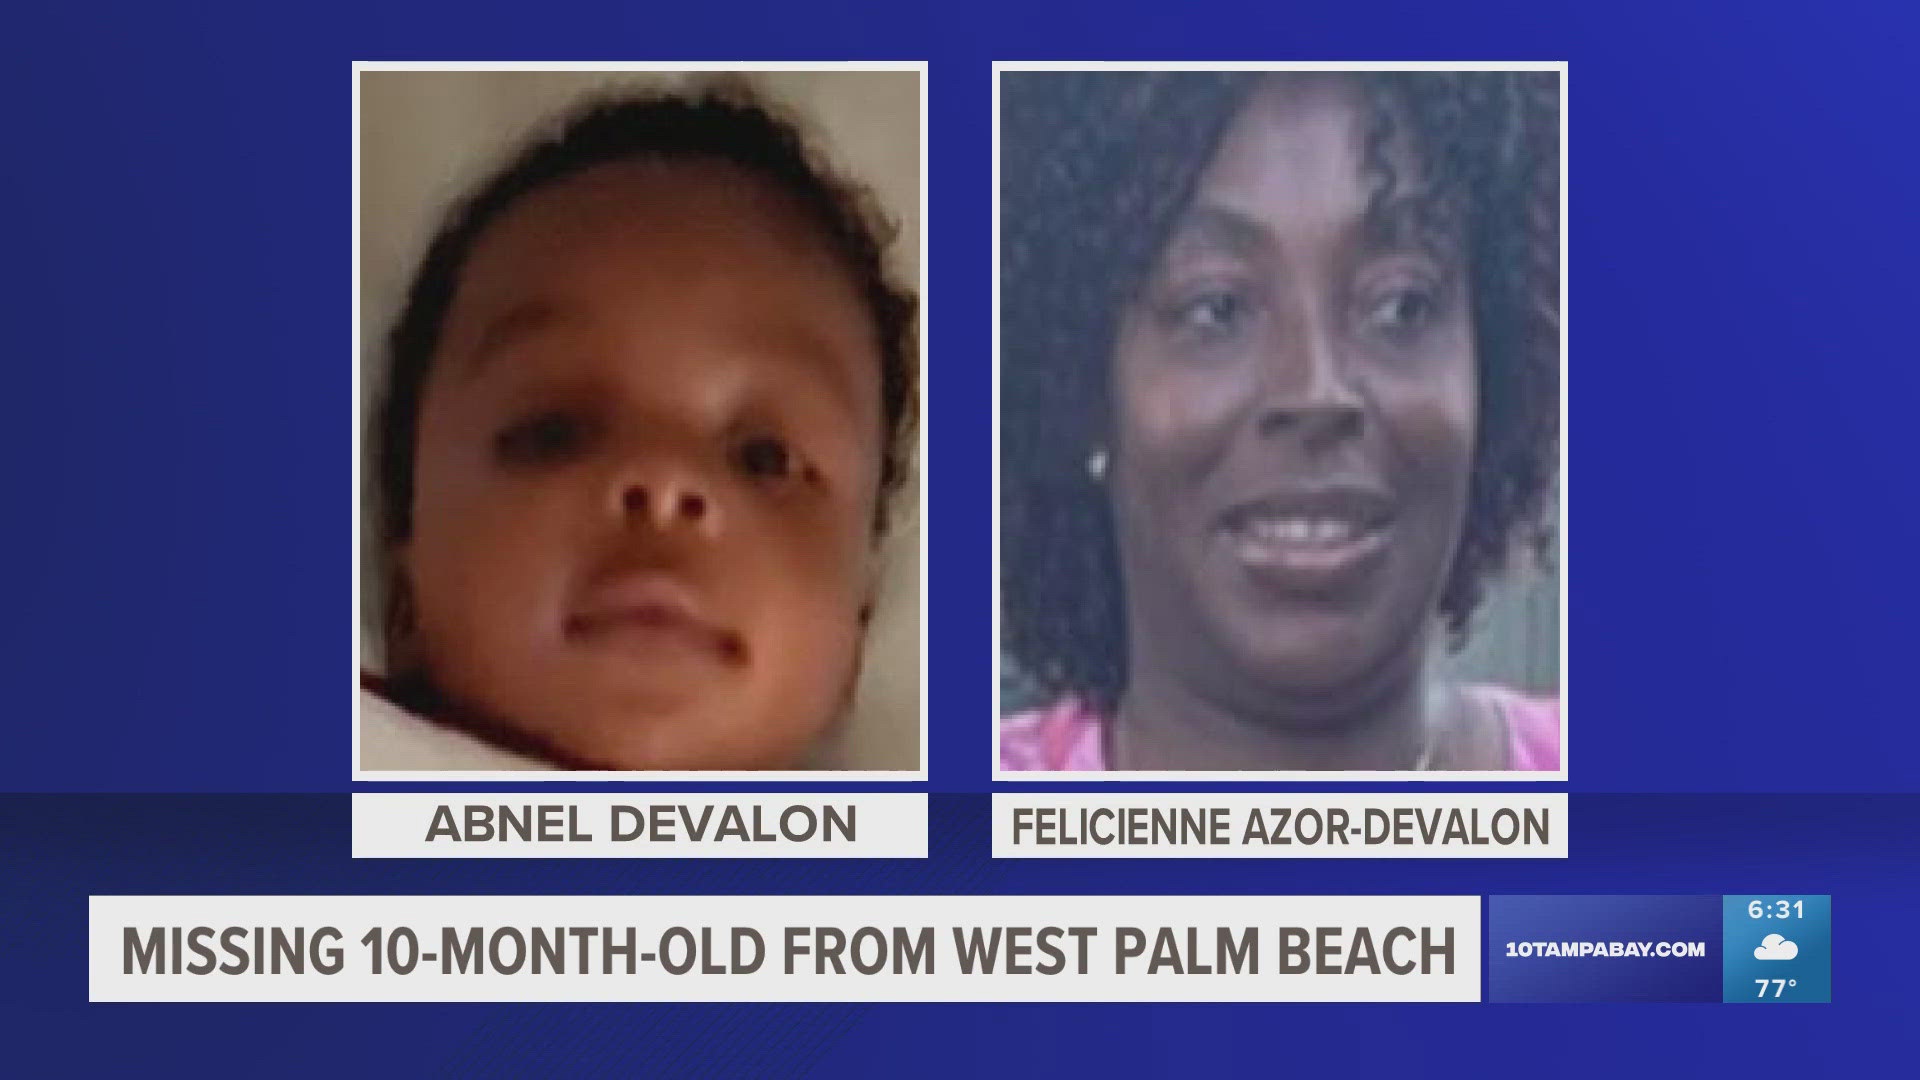 Authorities said Abnel Devalon may be with 38-year-old Felicienne Azor-Devalon after they were last seen near West Palm Beach.